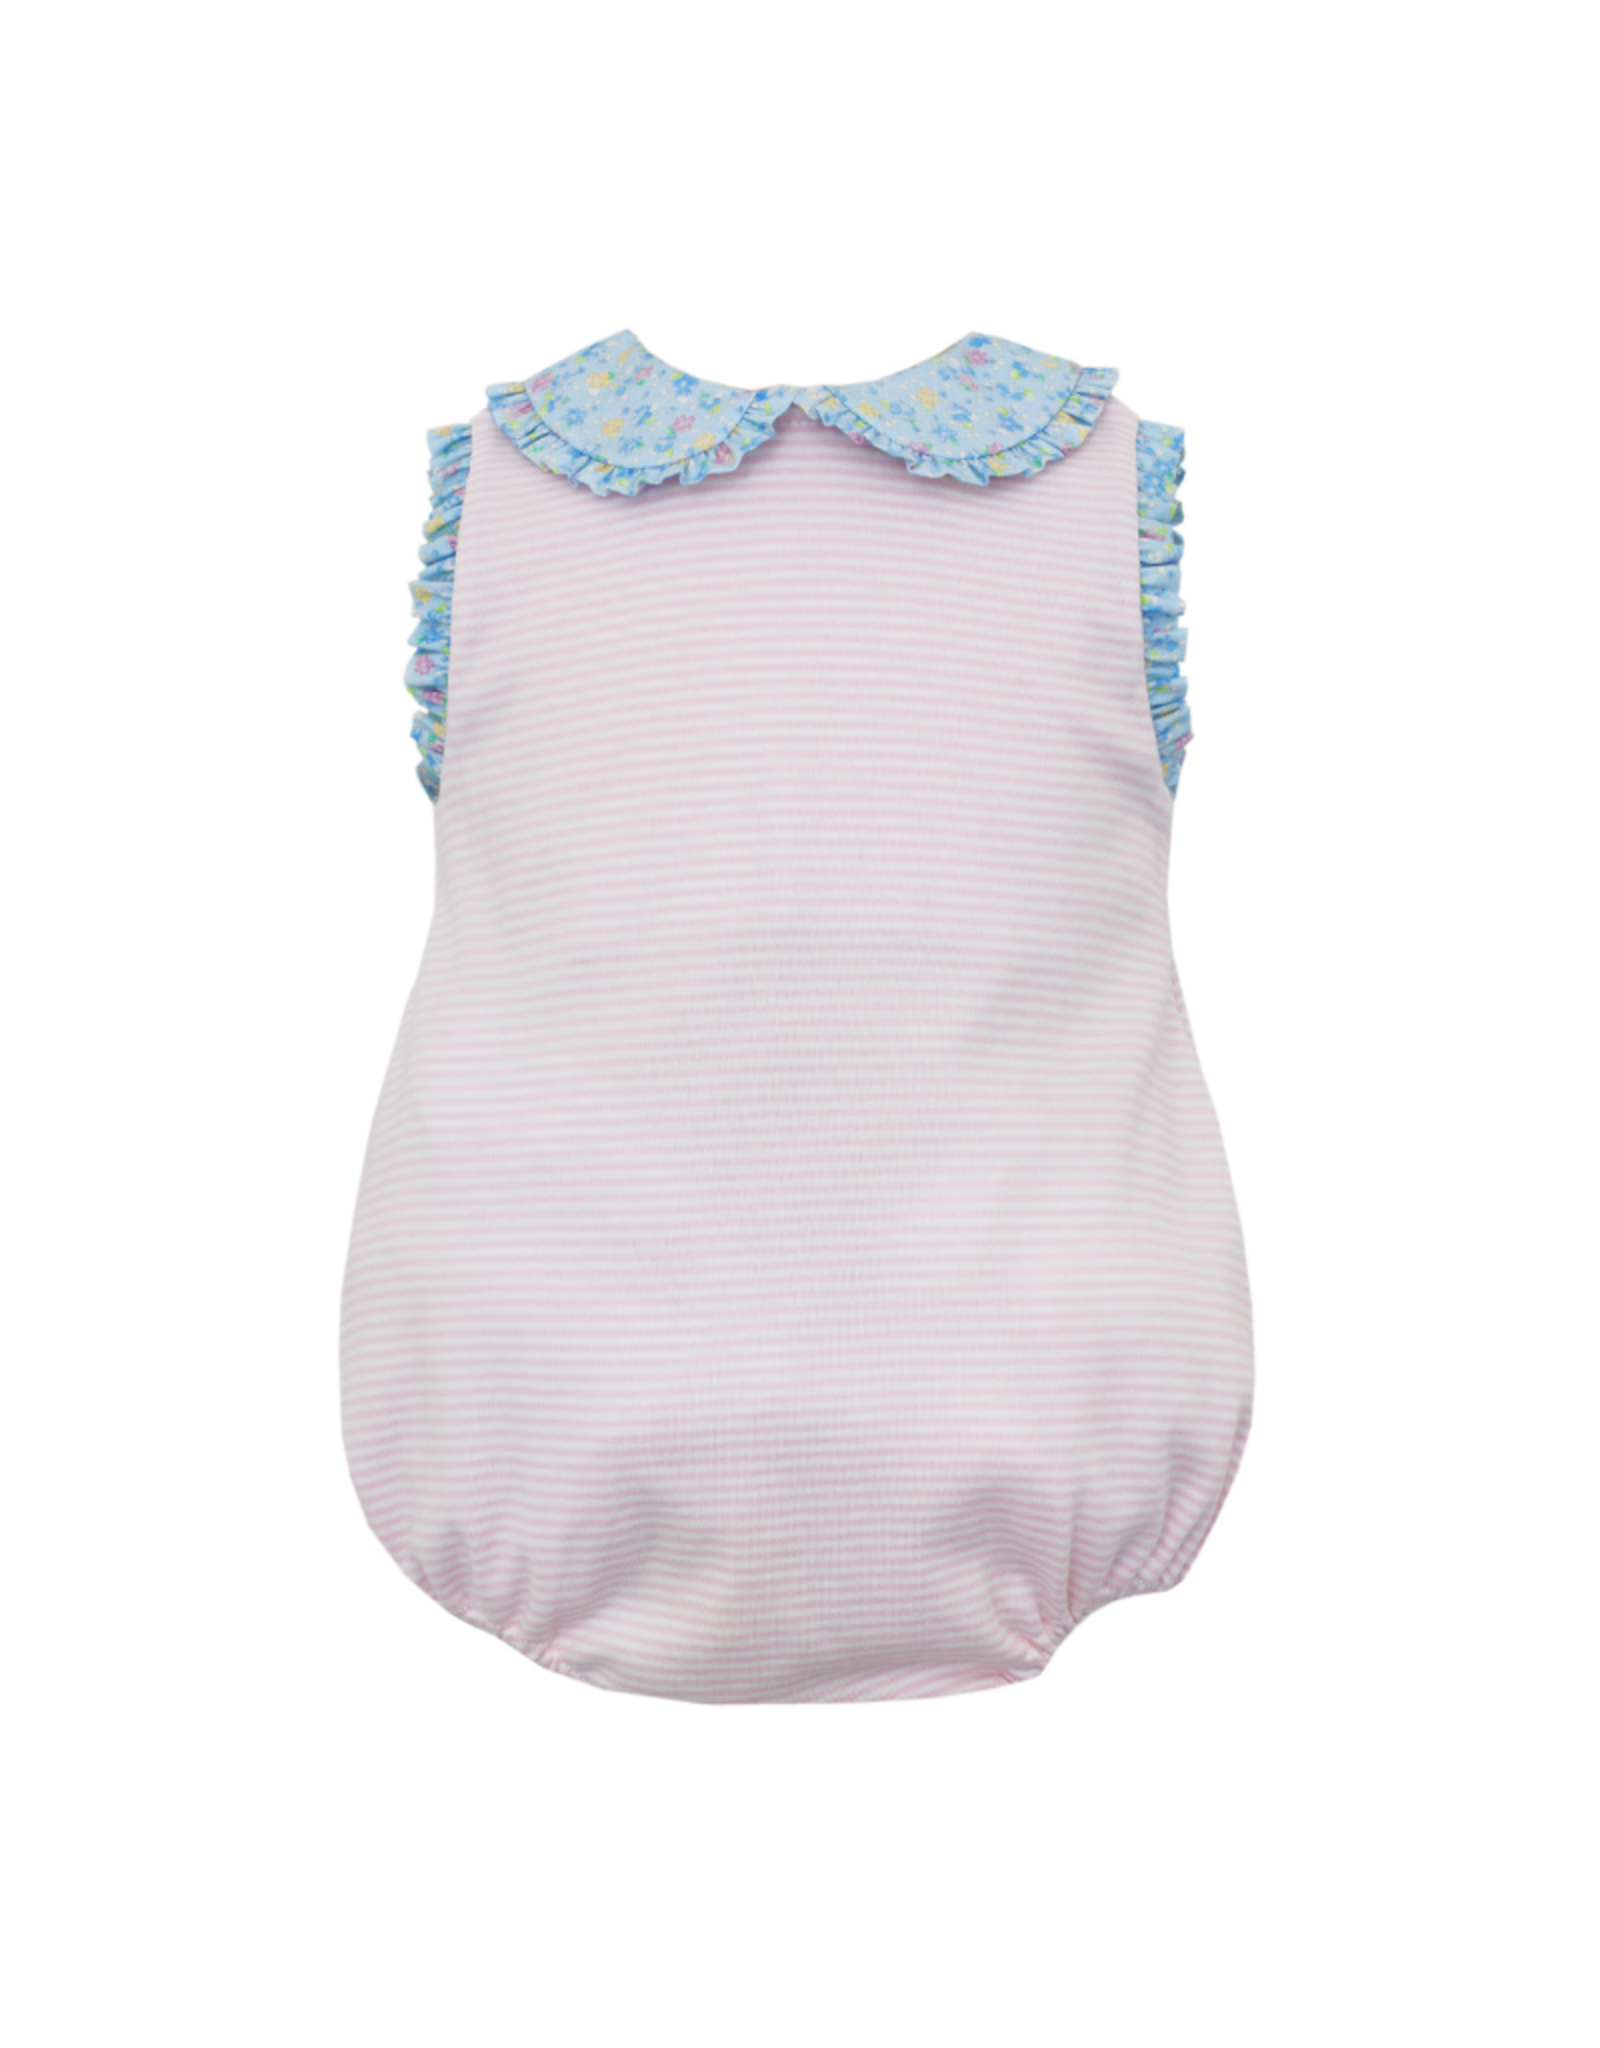 Petit Bebe Pink Stripe Knit Bubble with Blue Floral Collar